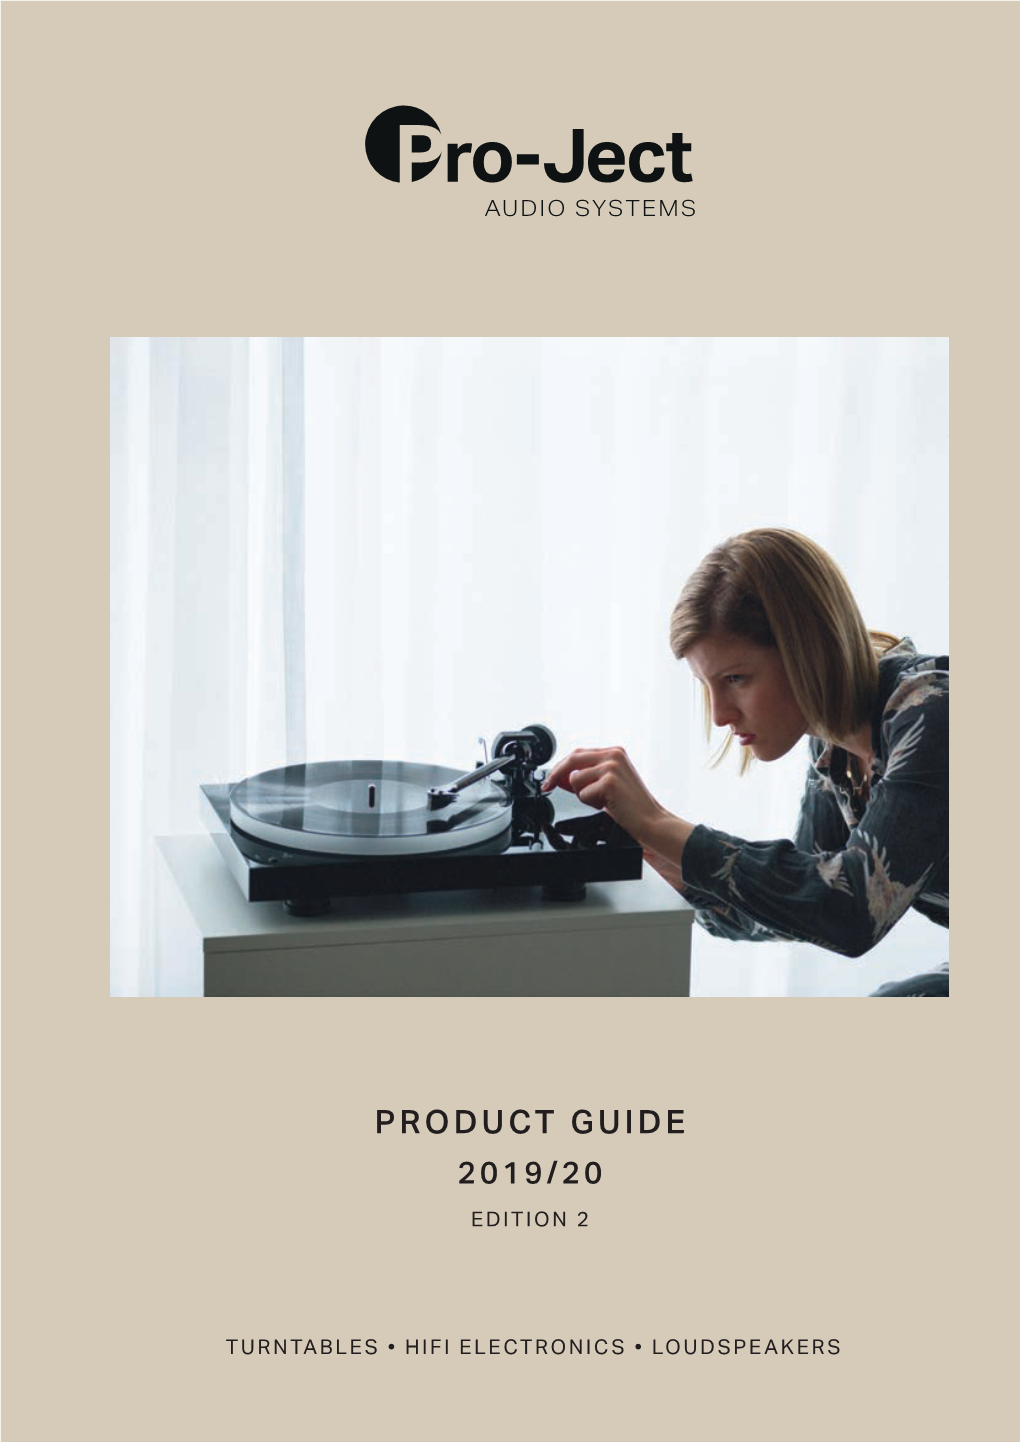 Product Guide 2019/20 Edition 2